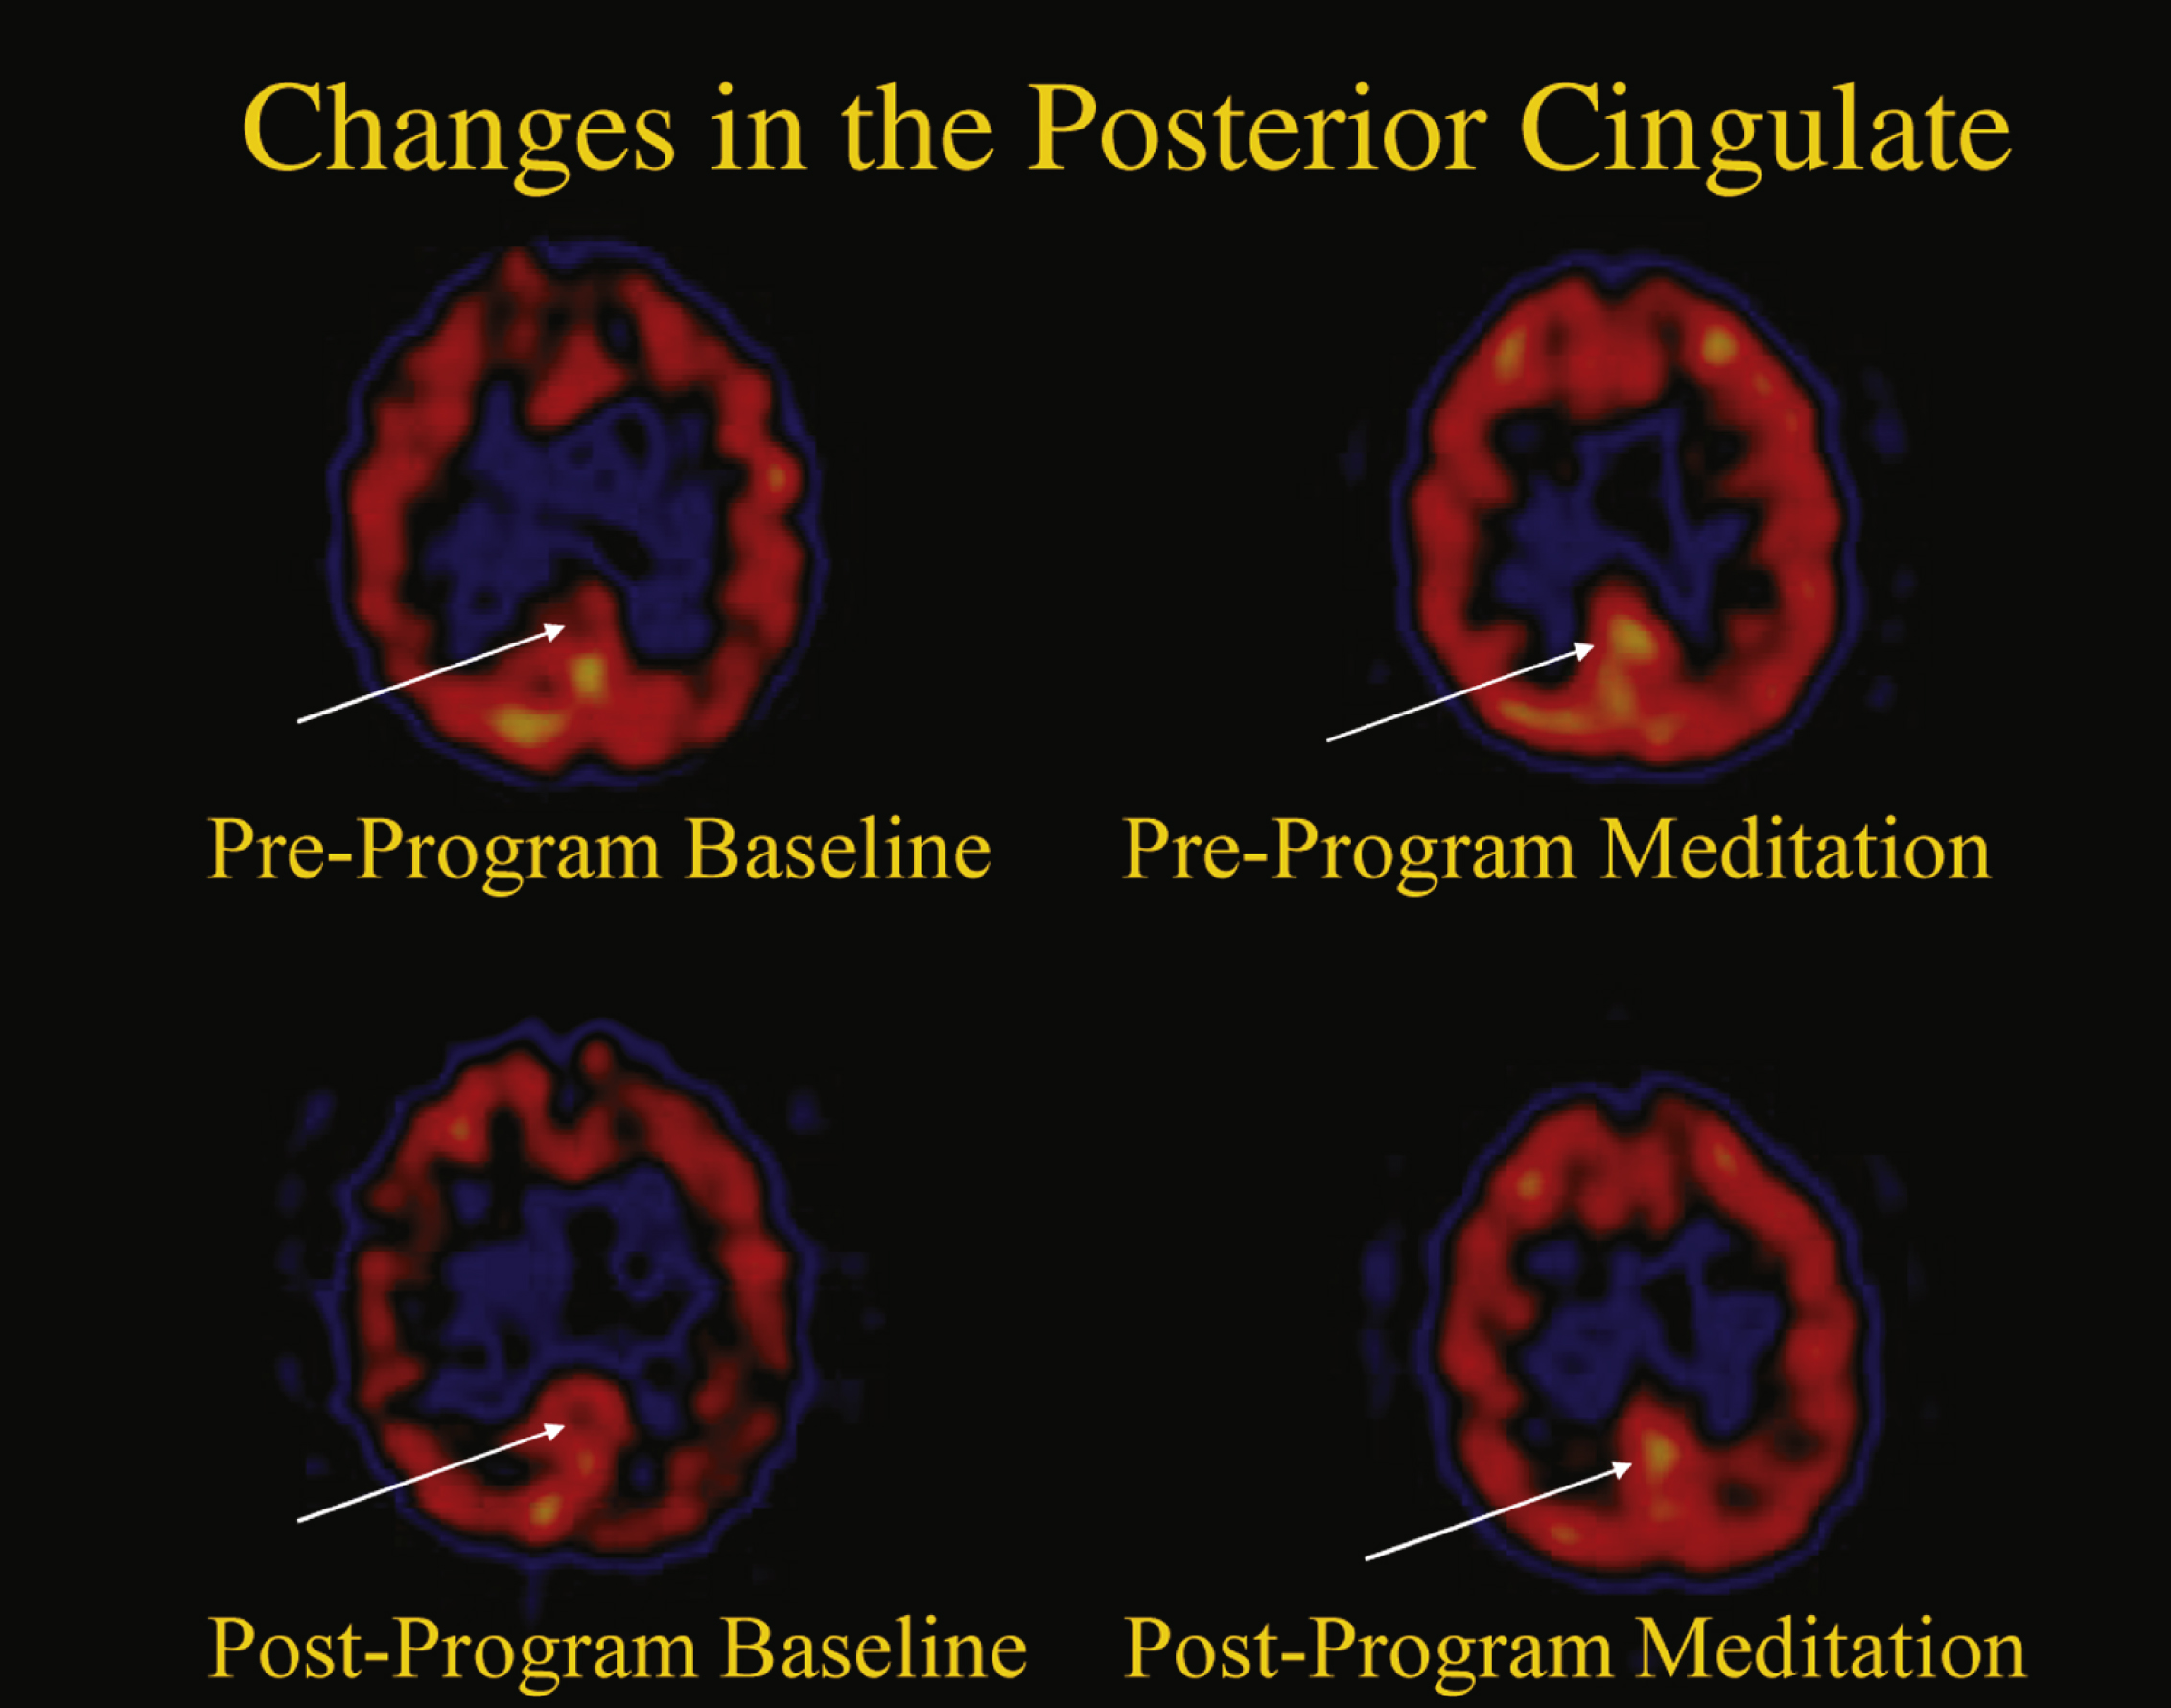 Changes in the posterior cingulate gyrus.